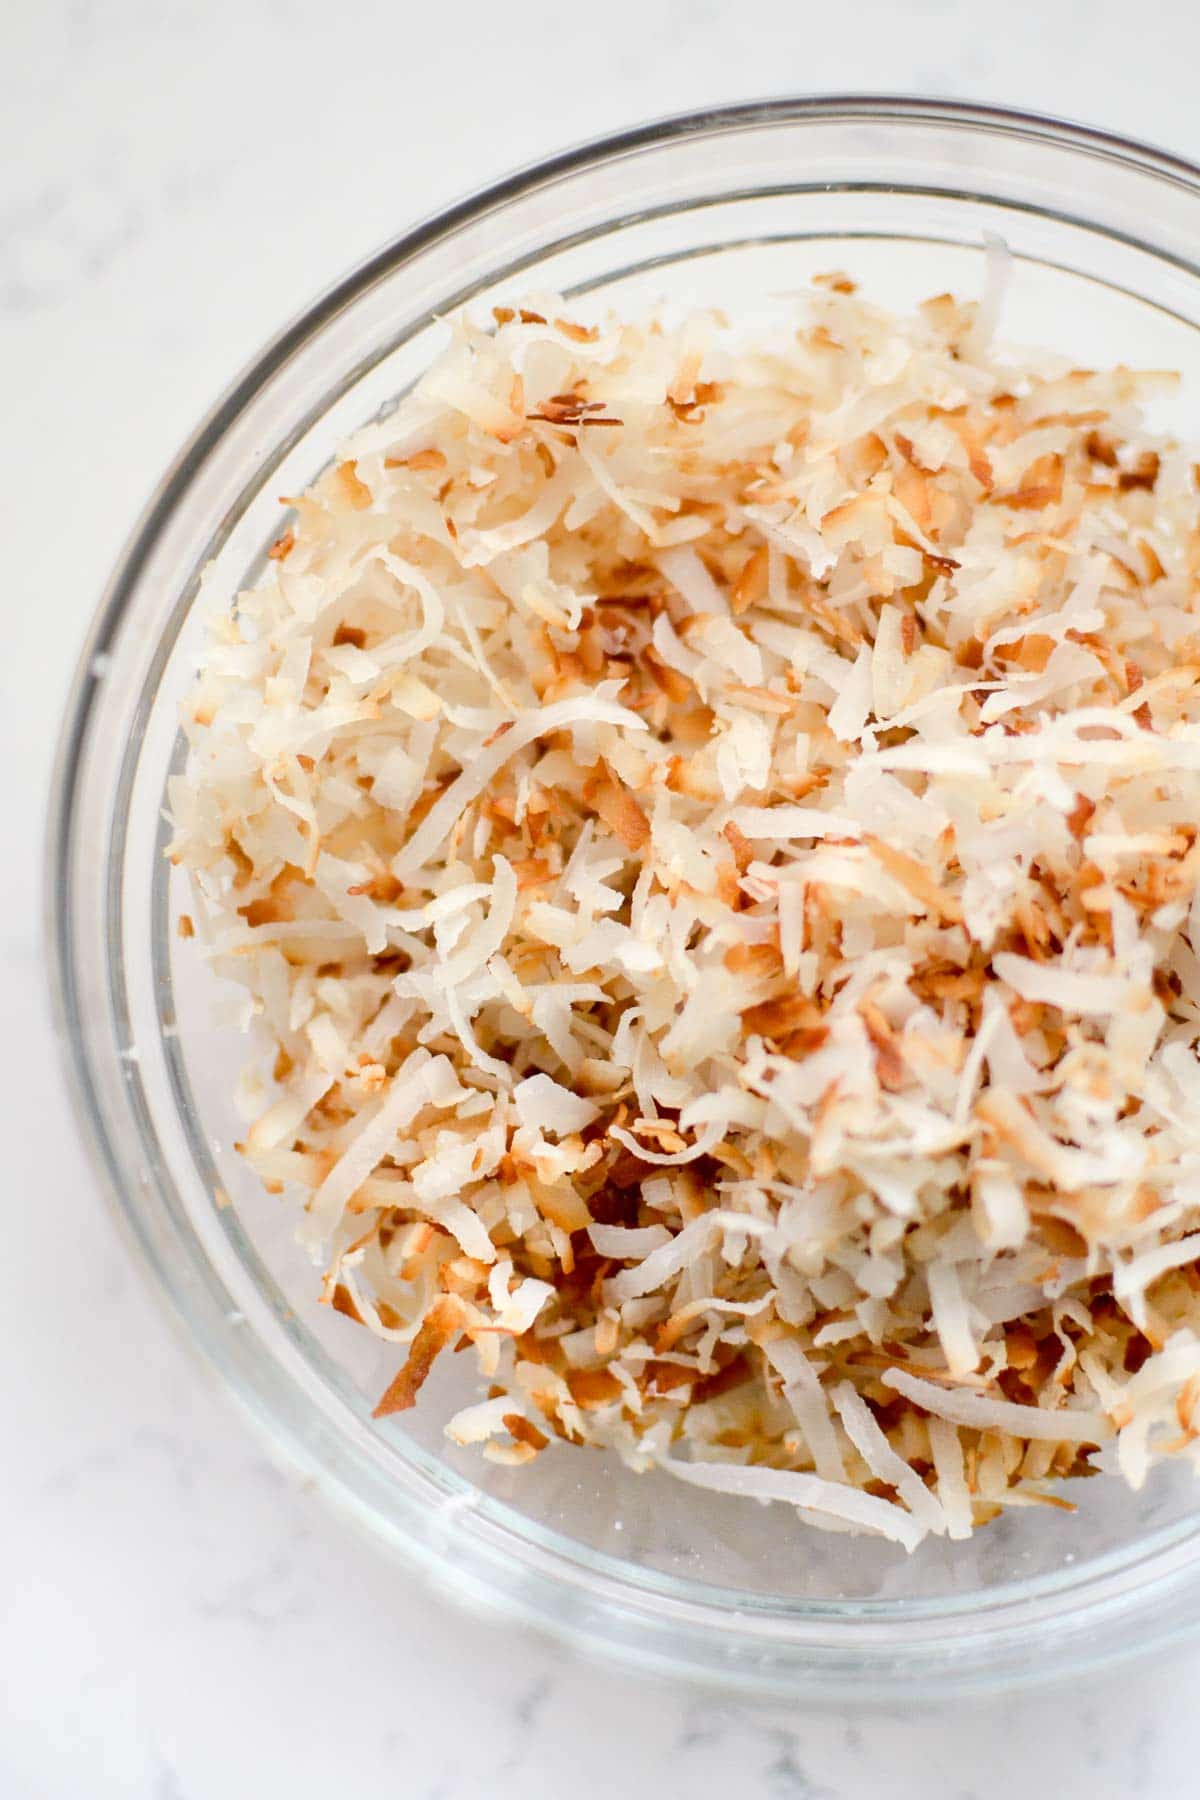 How to Make Toasted Coconut Chips